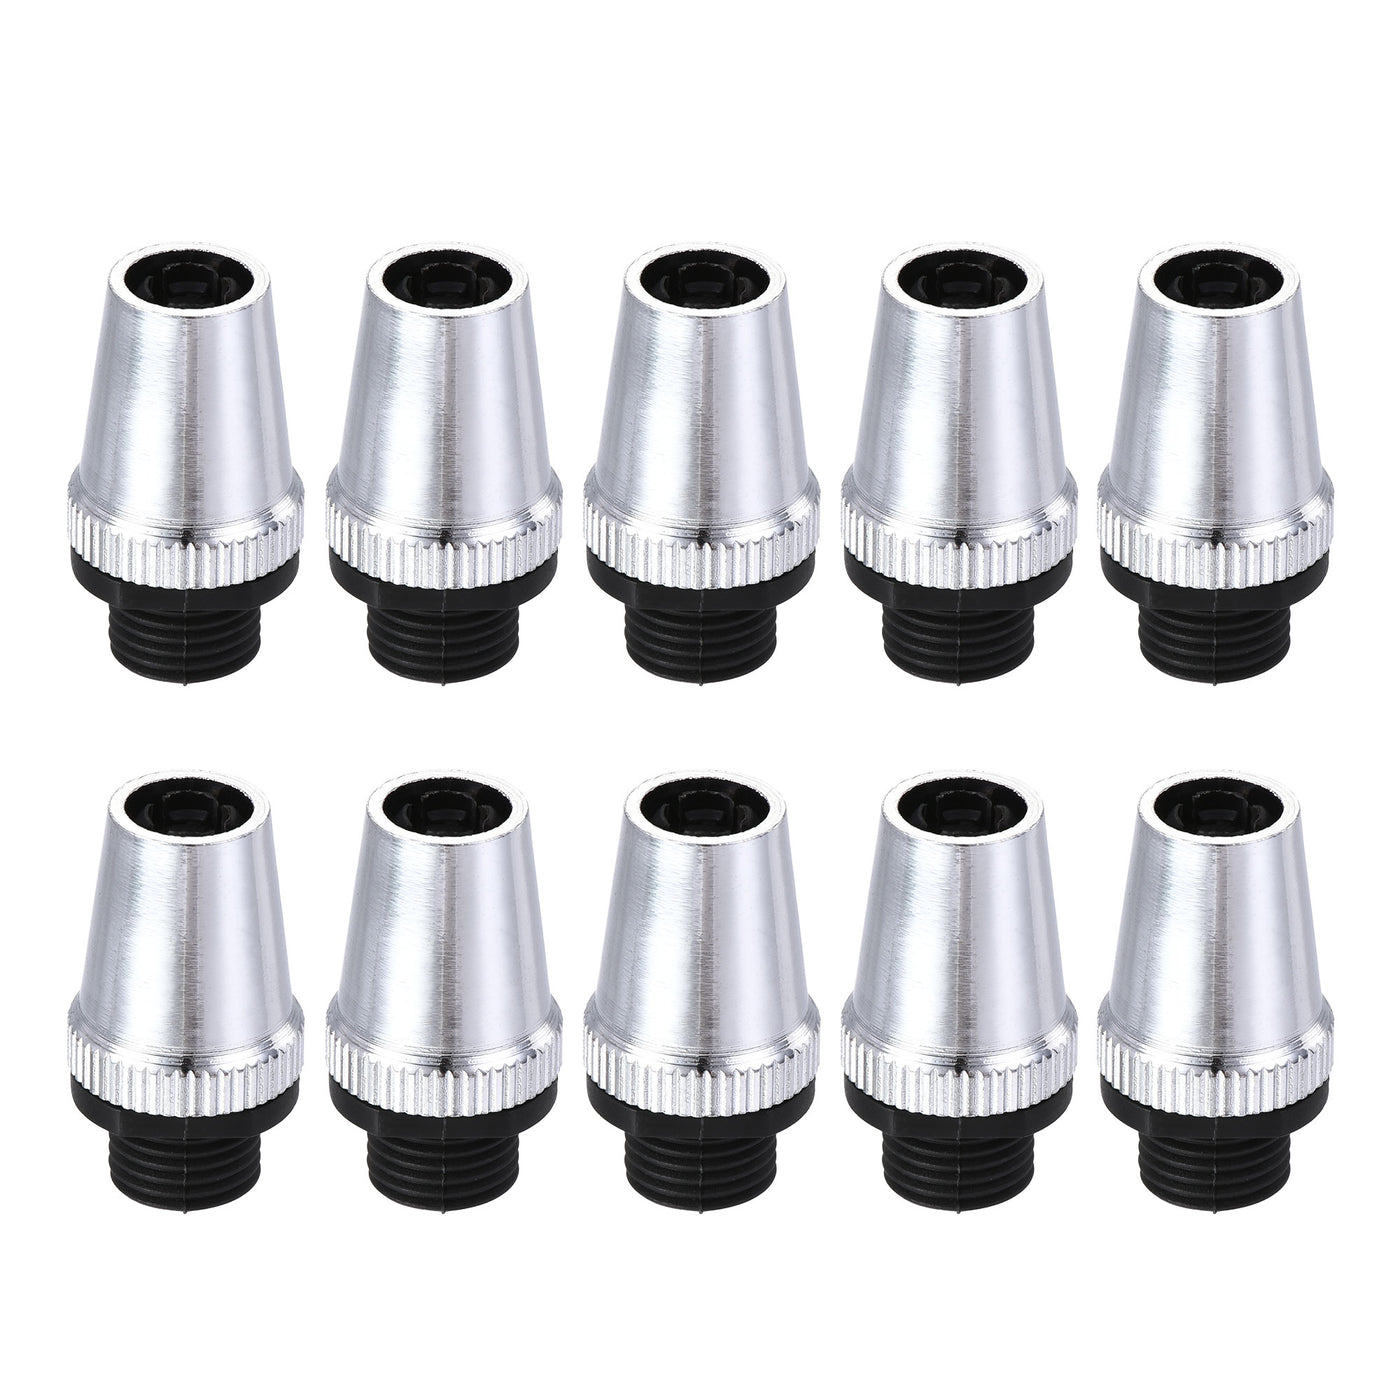 uxcell Uxcell Cable Glands Strain Relief Cord Grips Metal Chrome 10Pcs for Wiring Hanging Light Ceiling Pendant Lamp